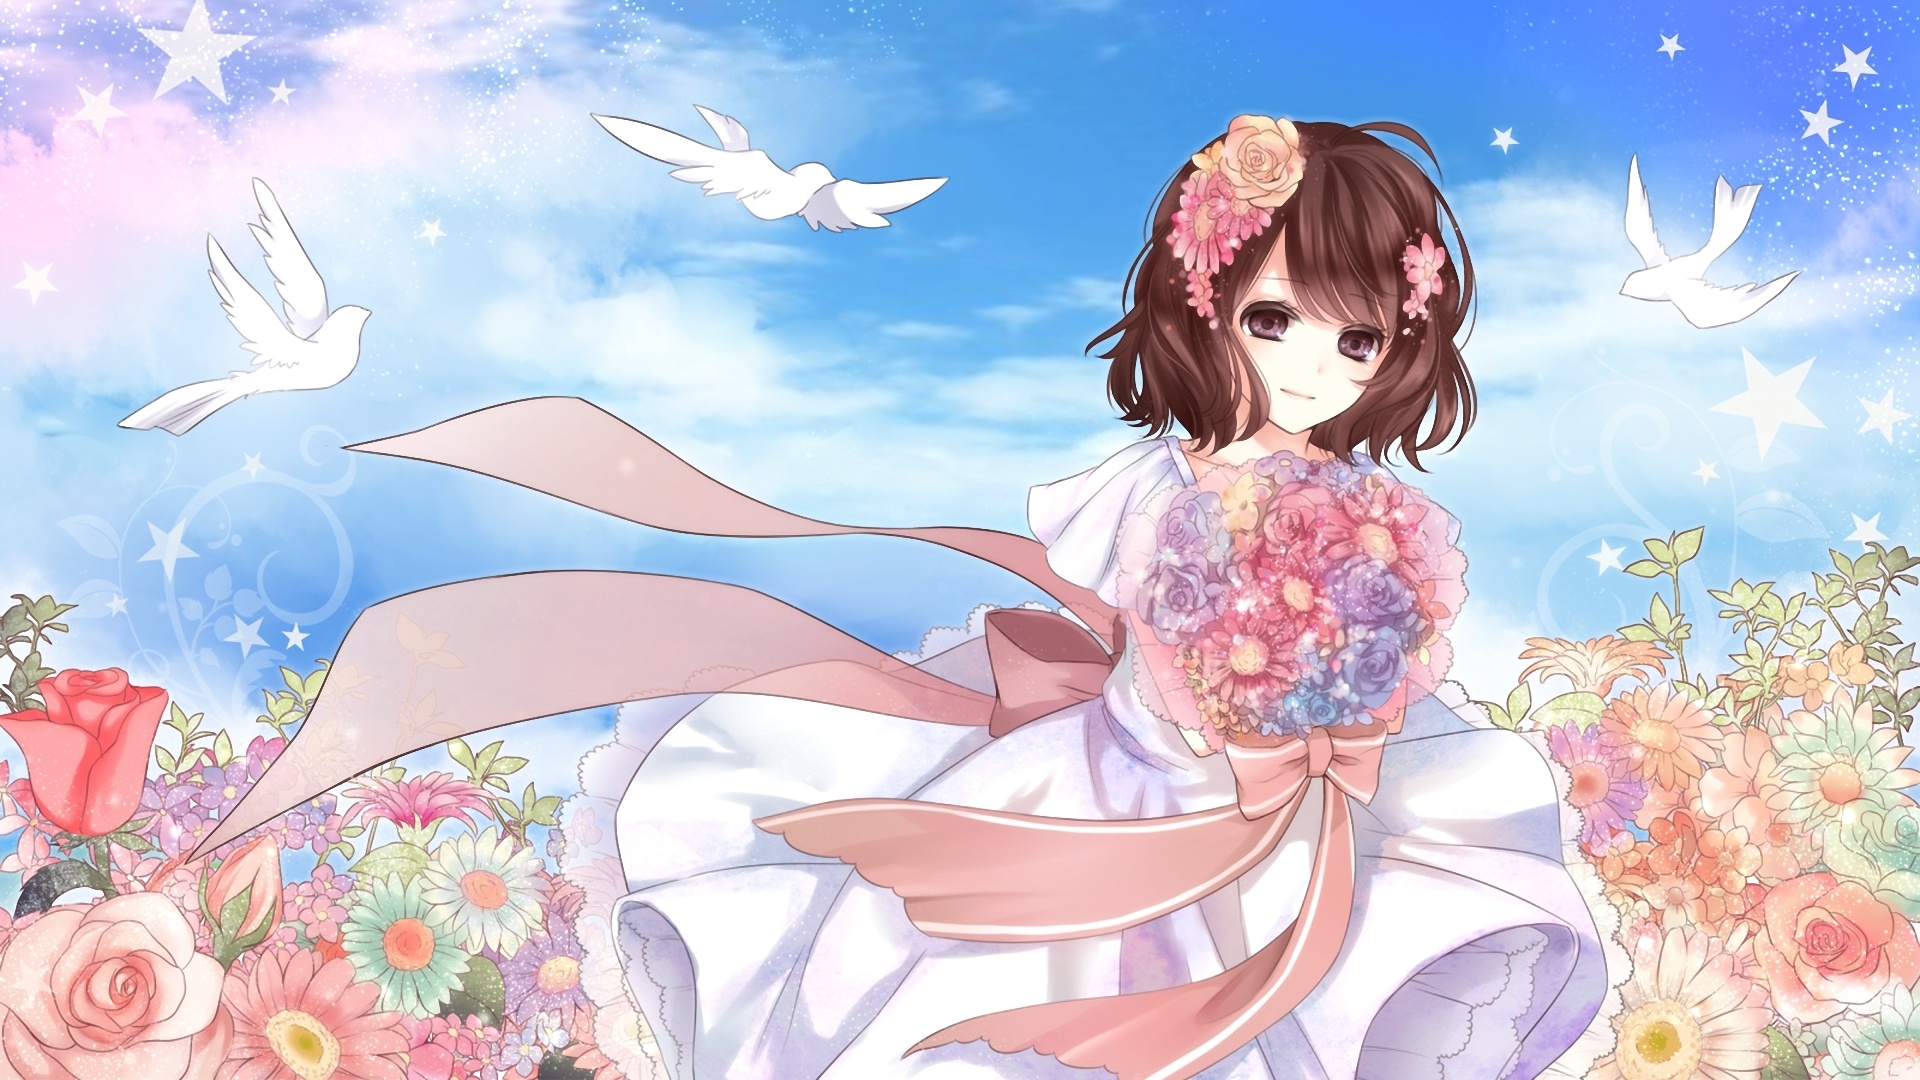 Anime Girl And Flowers cool background